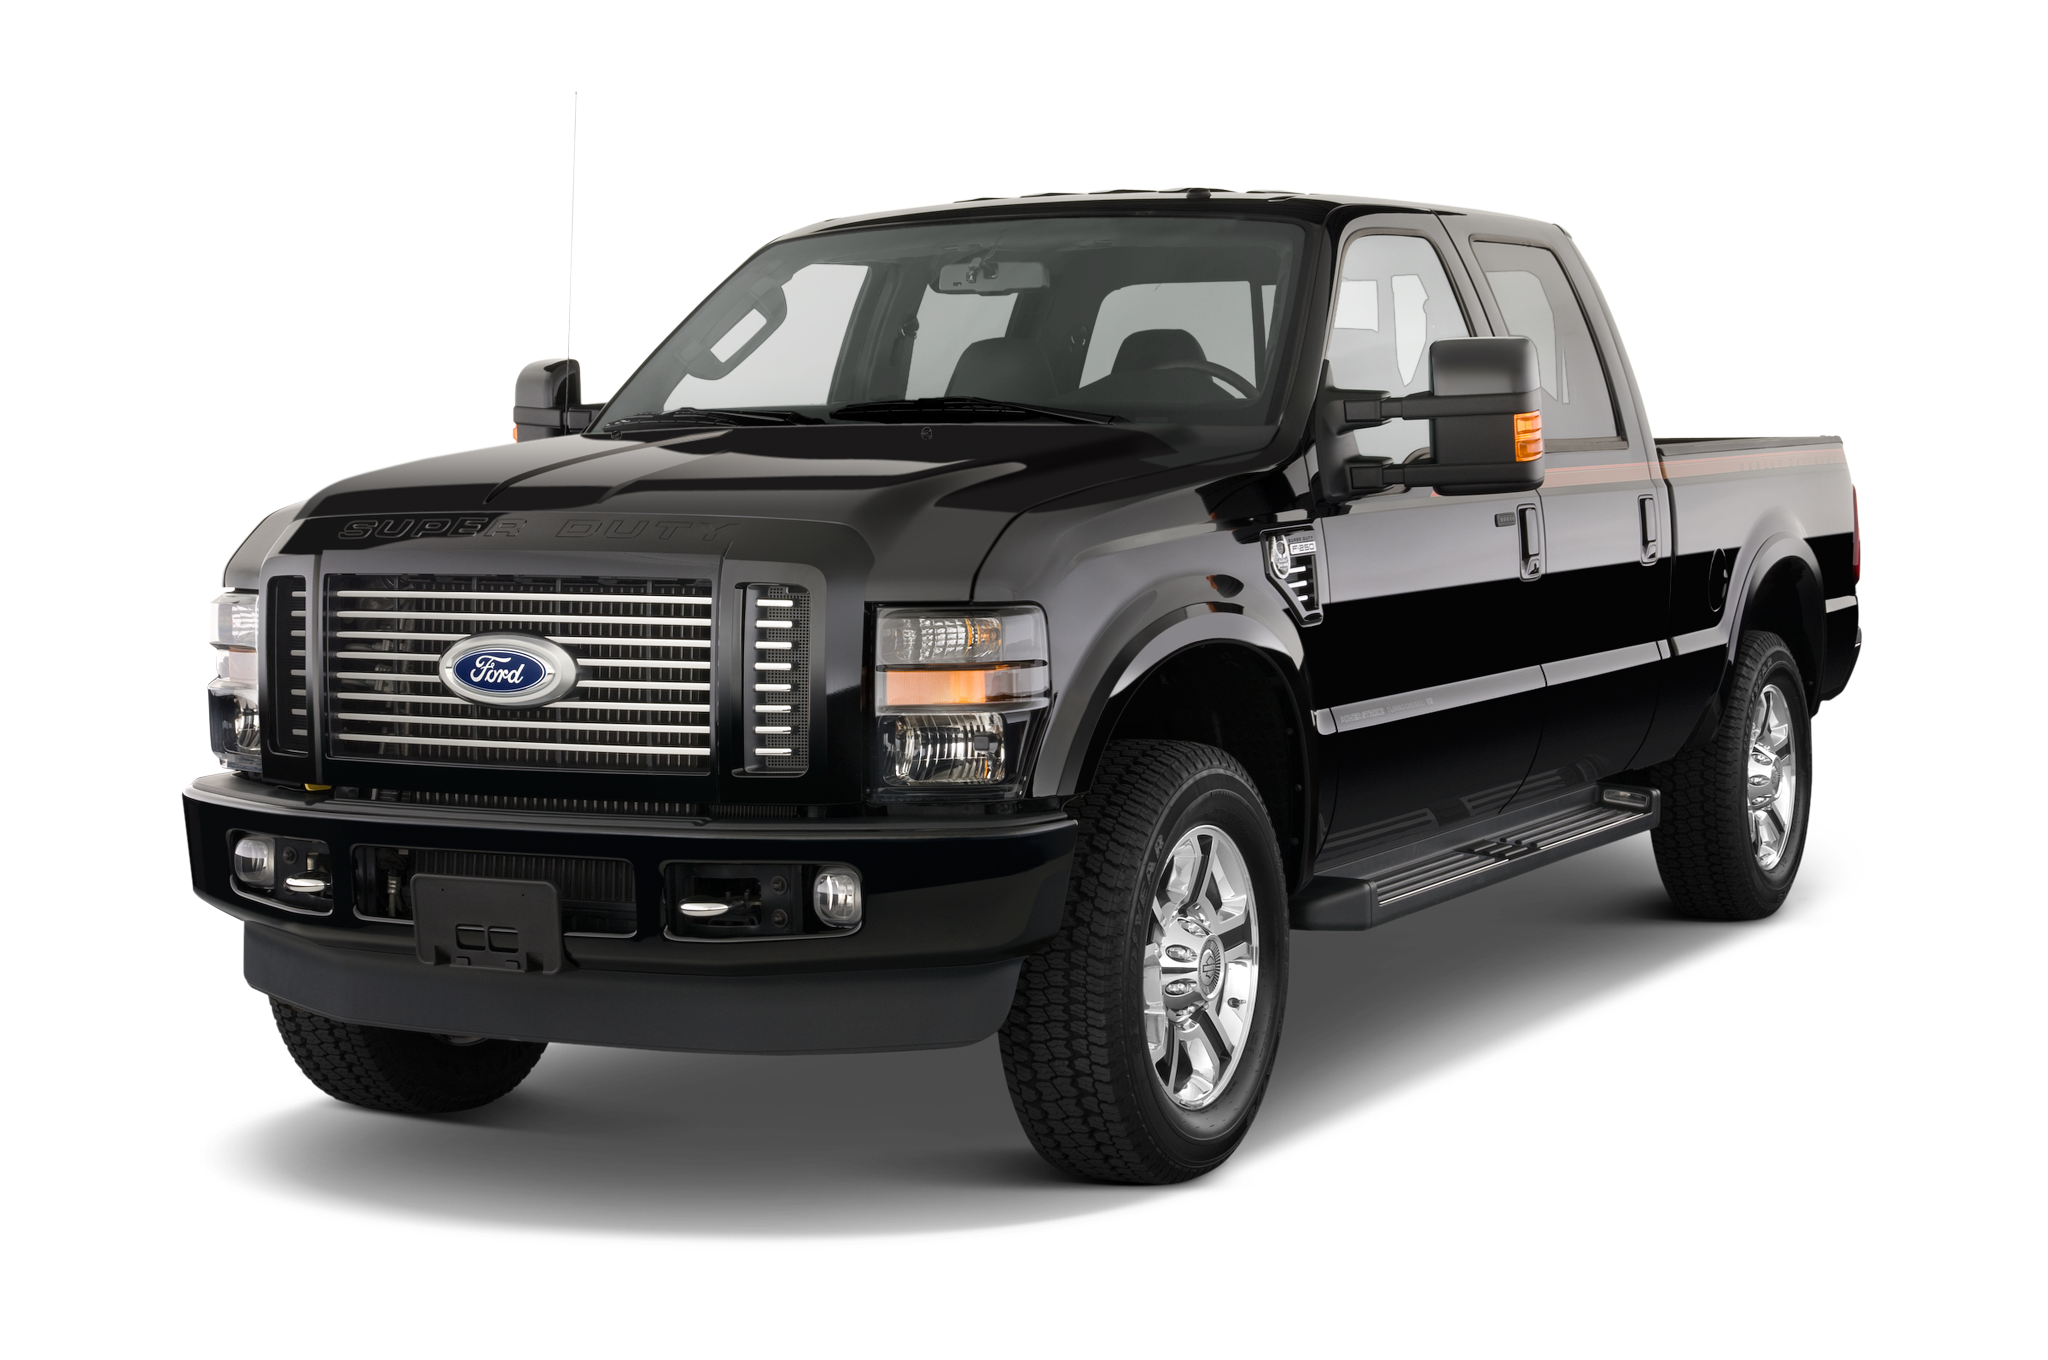 2010 Ford F 250 Super Duty Specs And Features Msn Autos